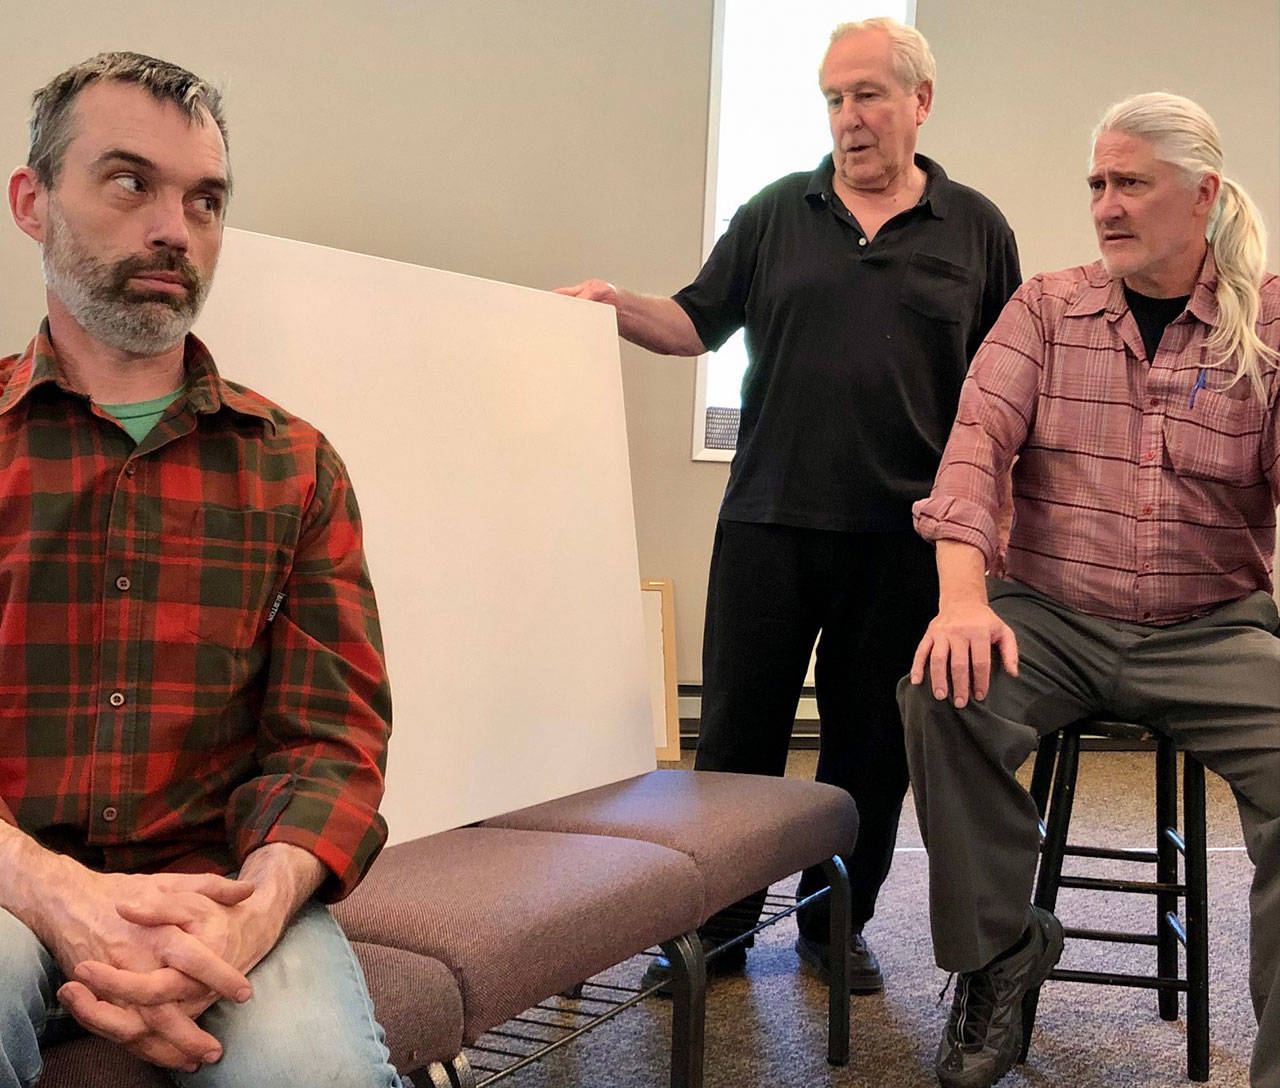 The actors in Drama Dock’s production of “ART,” include (left to right) Jon Kuzma, Steve Jones and Bill Epstein; playing characters whose friendship frays over a large, all-white painting (Courtesy Photo).